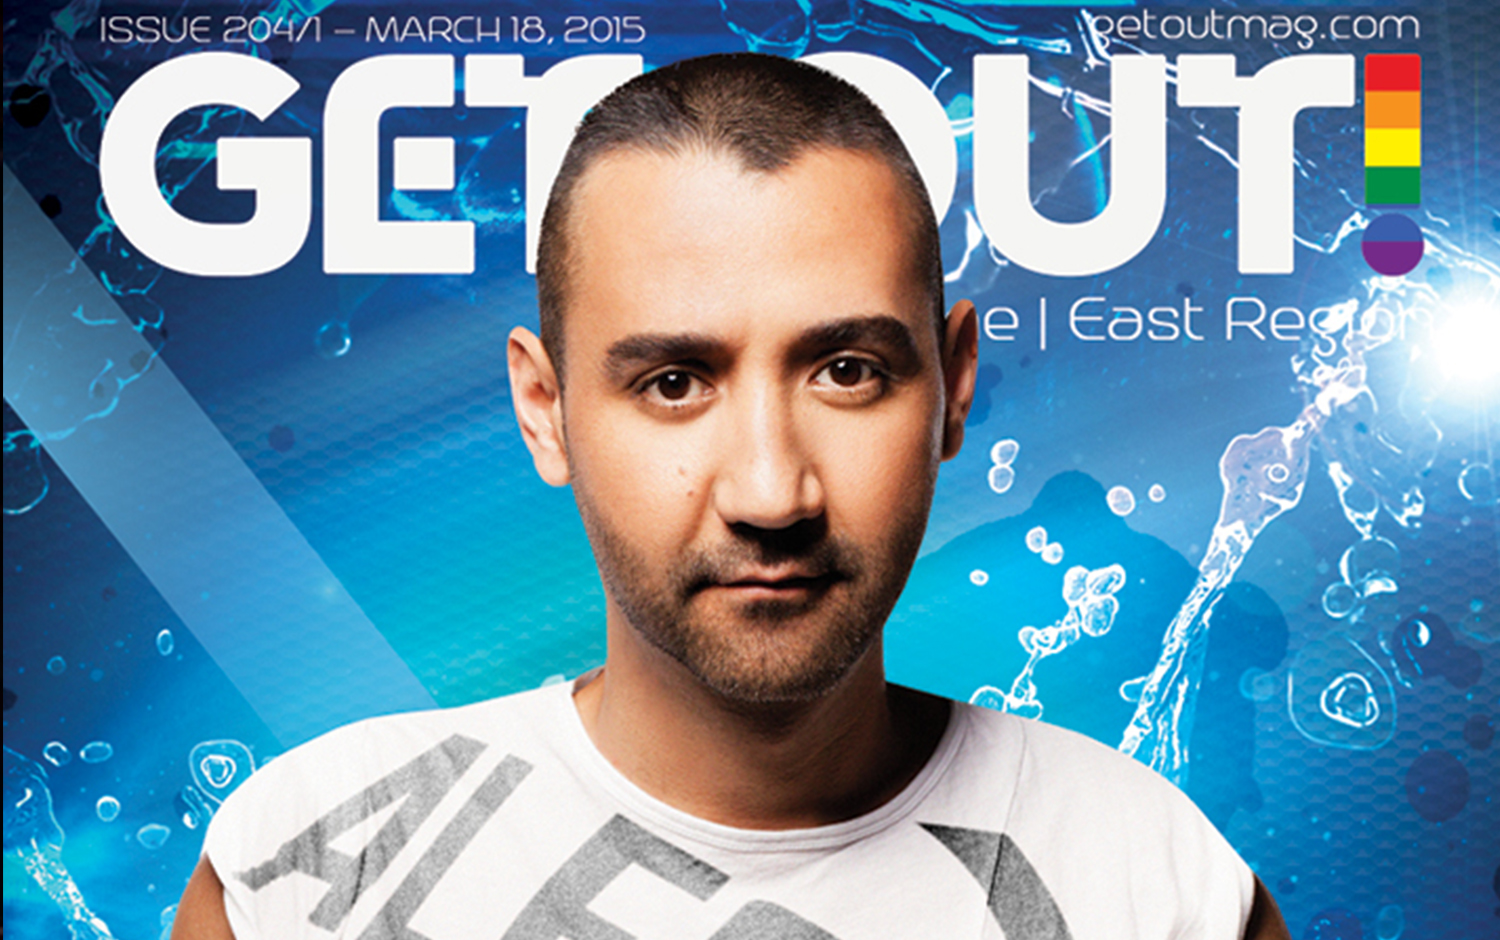  Get Out! GAY Magazine – Issue 204 – March 18 | DJ ISAAC ESCALANTE